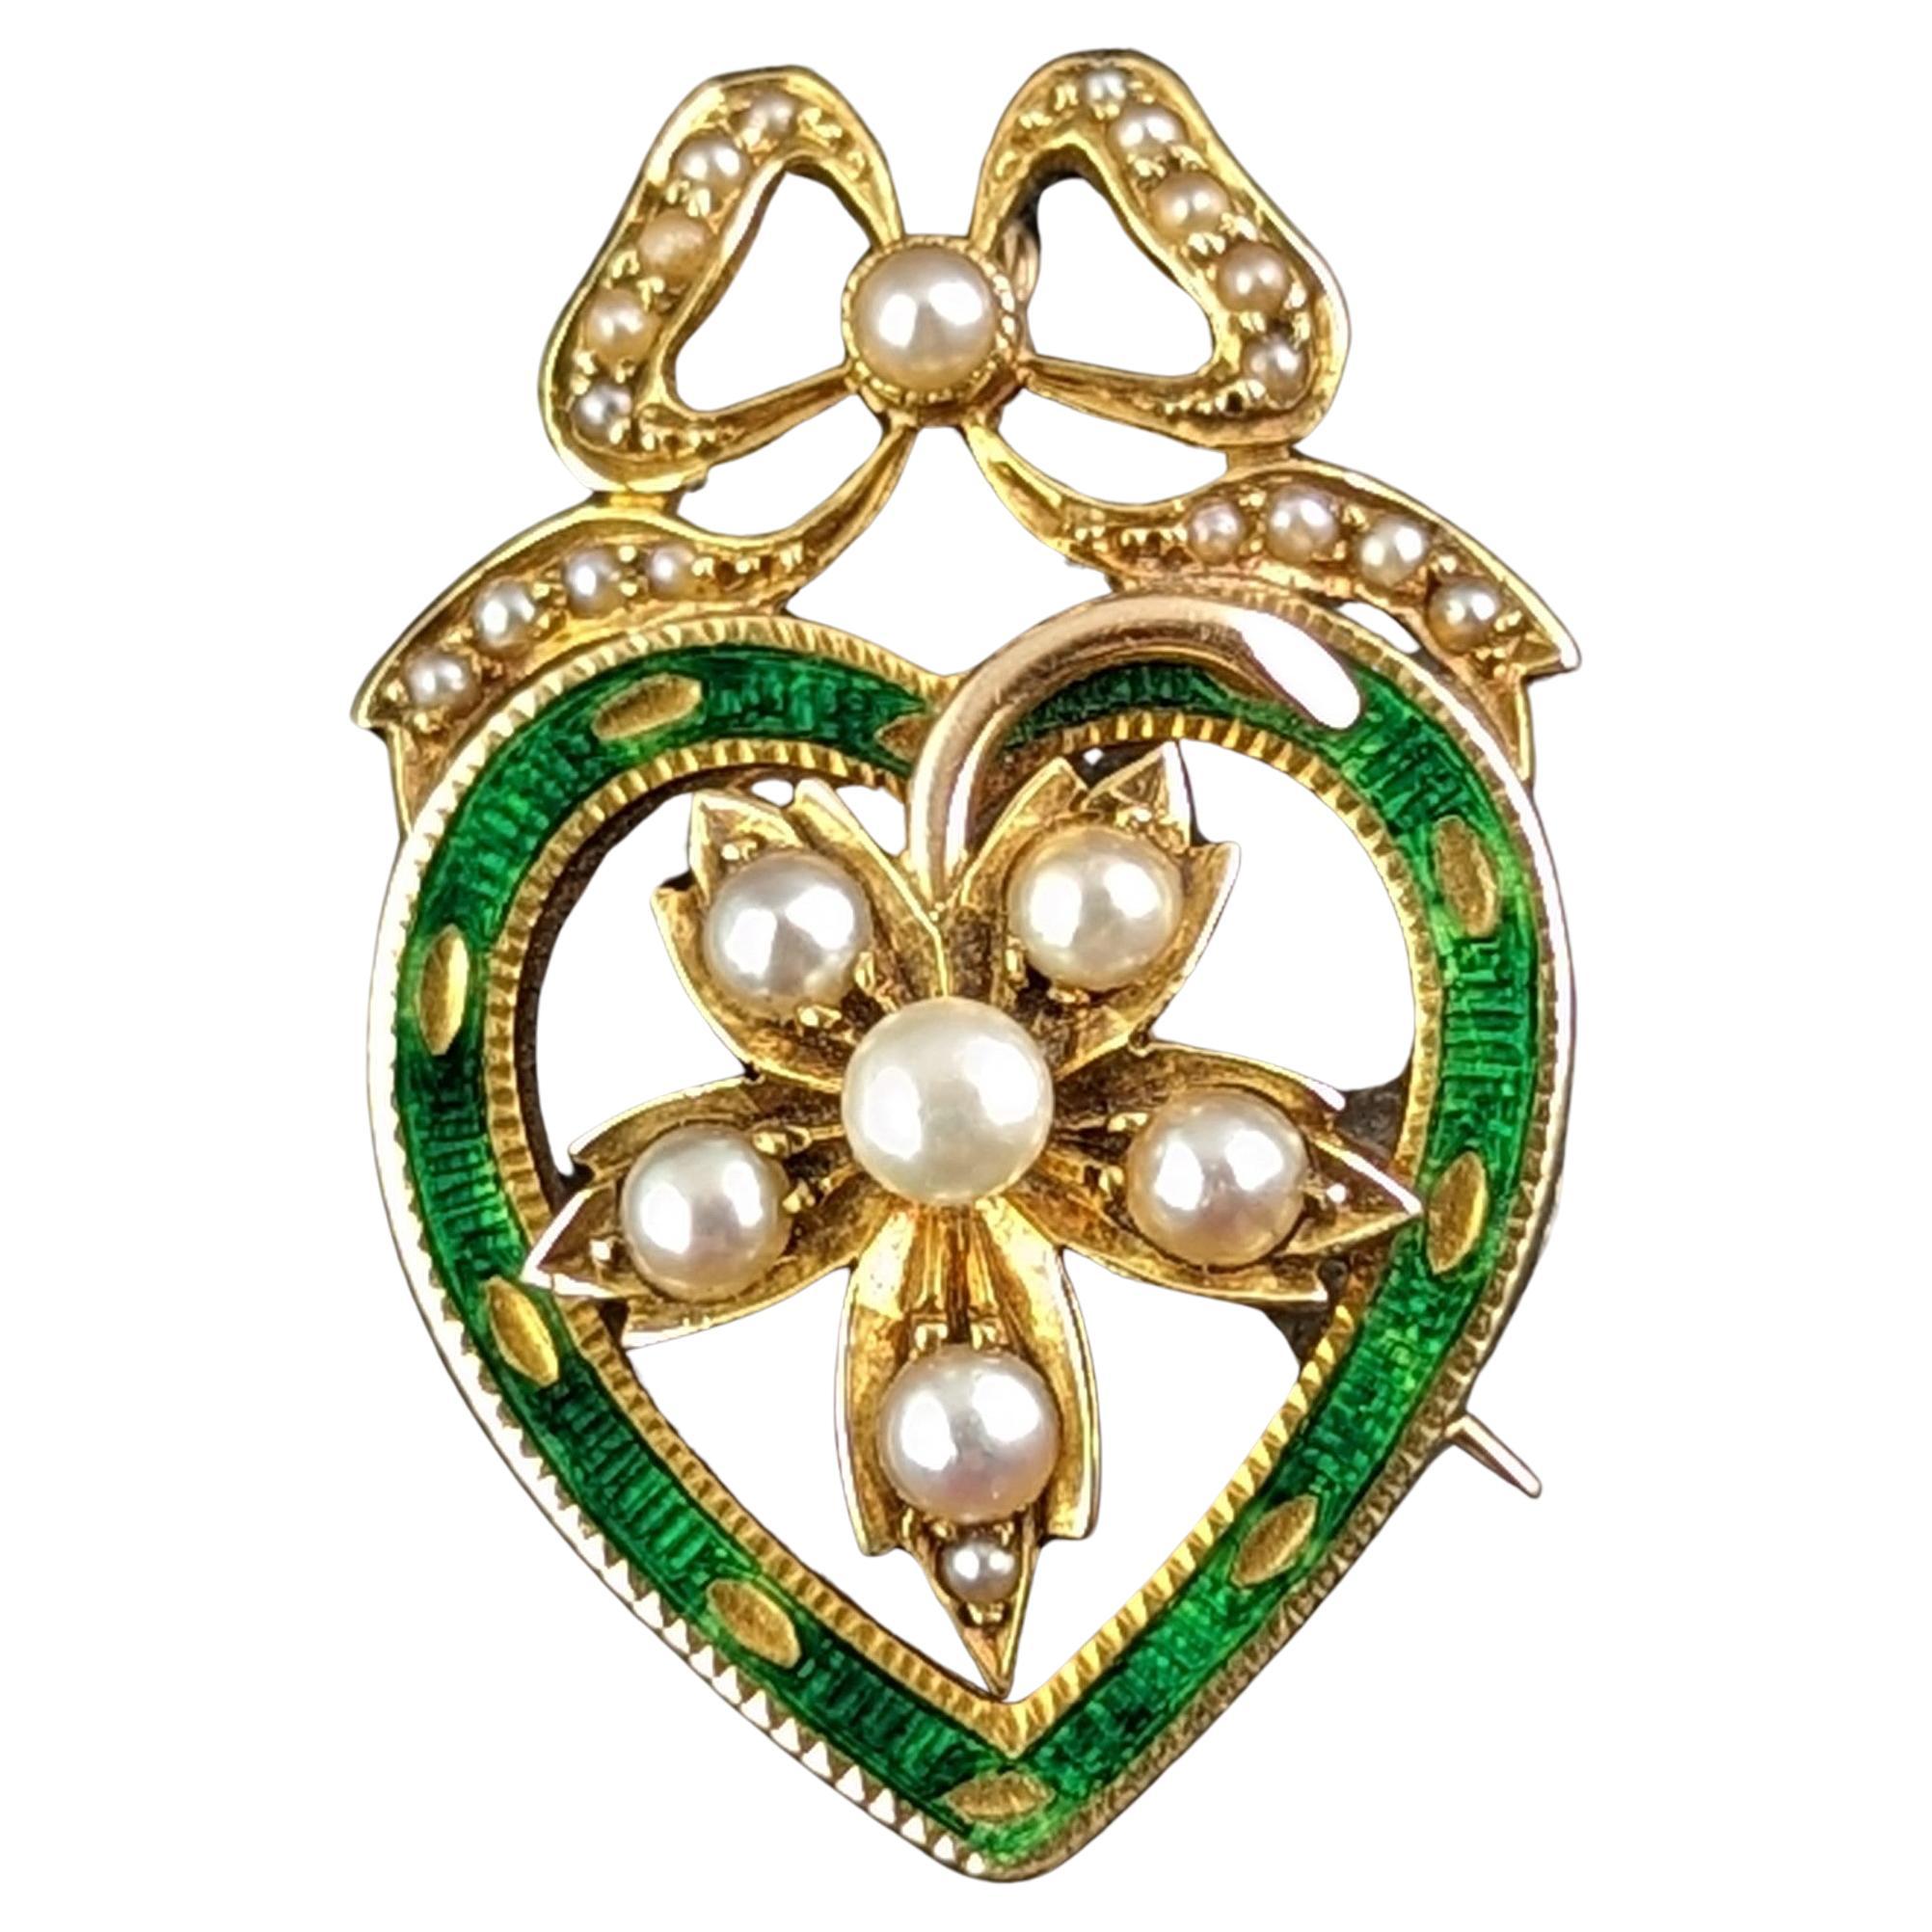 Antique Green Enamel and Pearl Heart pendant brooch, 9k yellow gold 